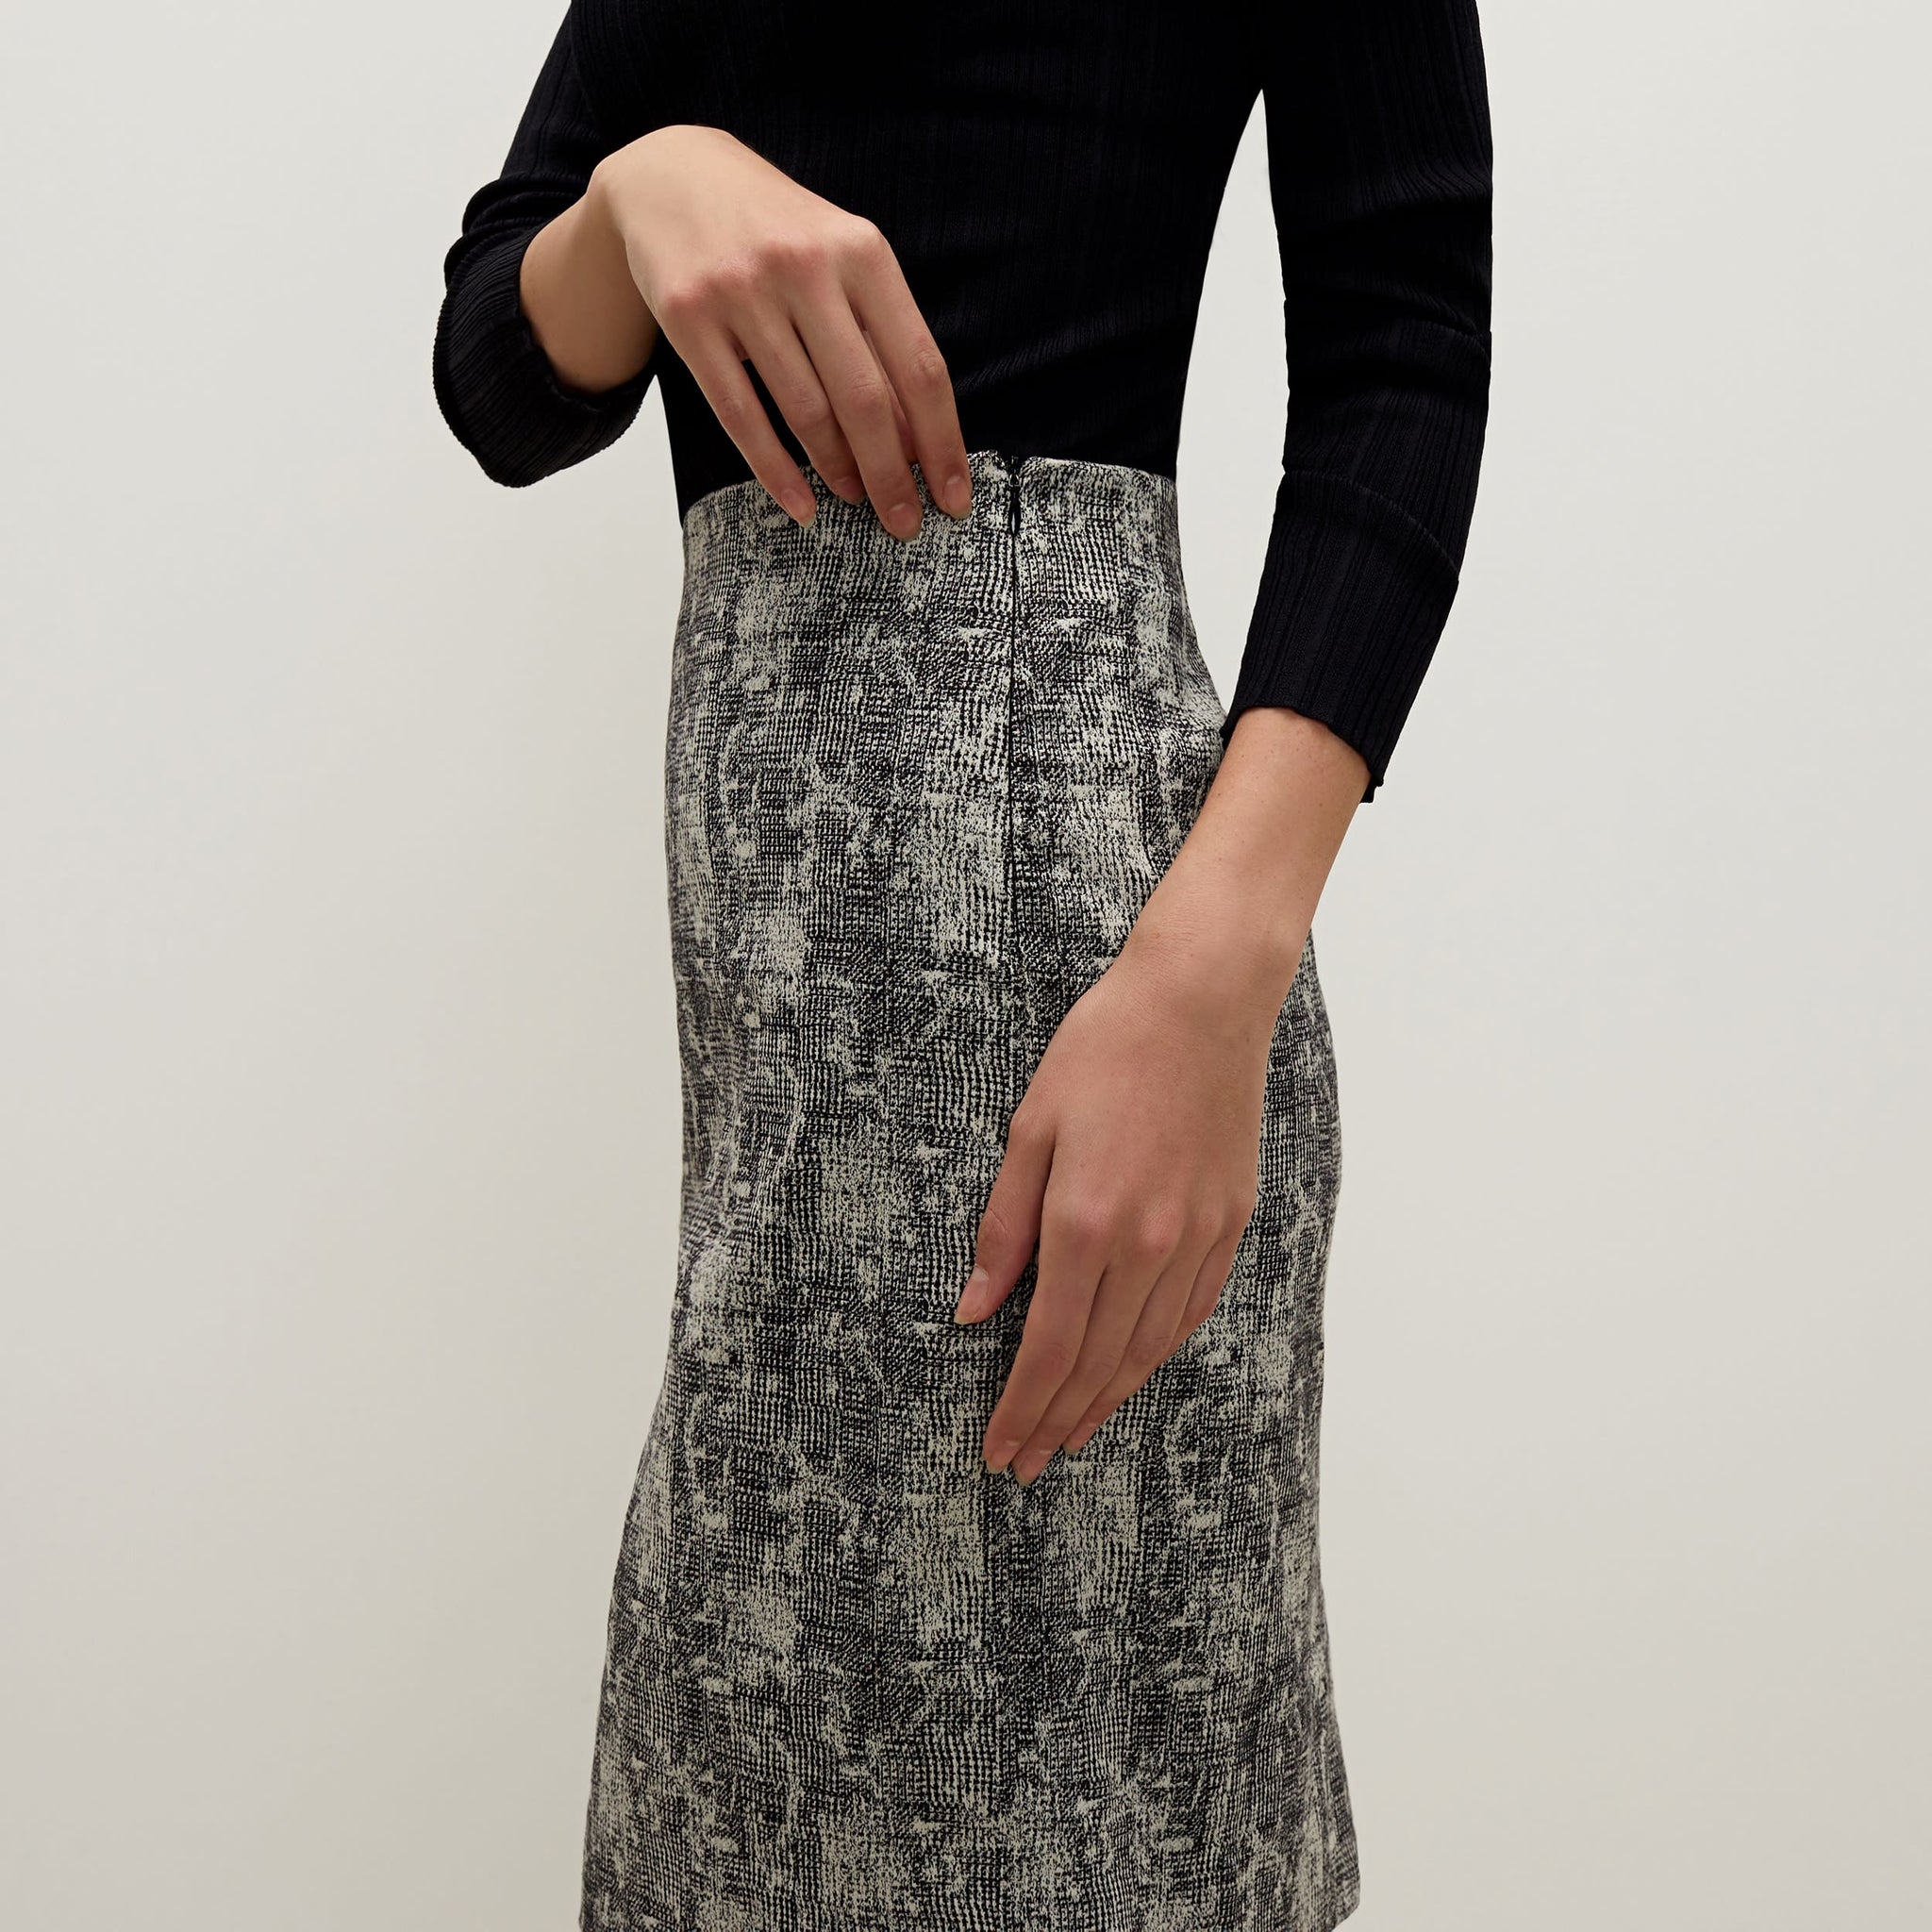 Side image of a woman standing wearing the Noho skirt in crackle